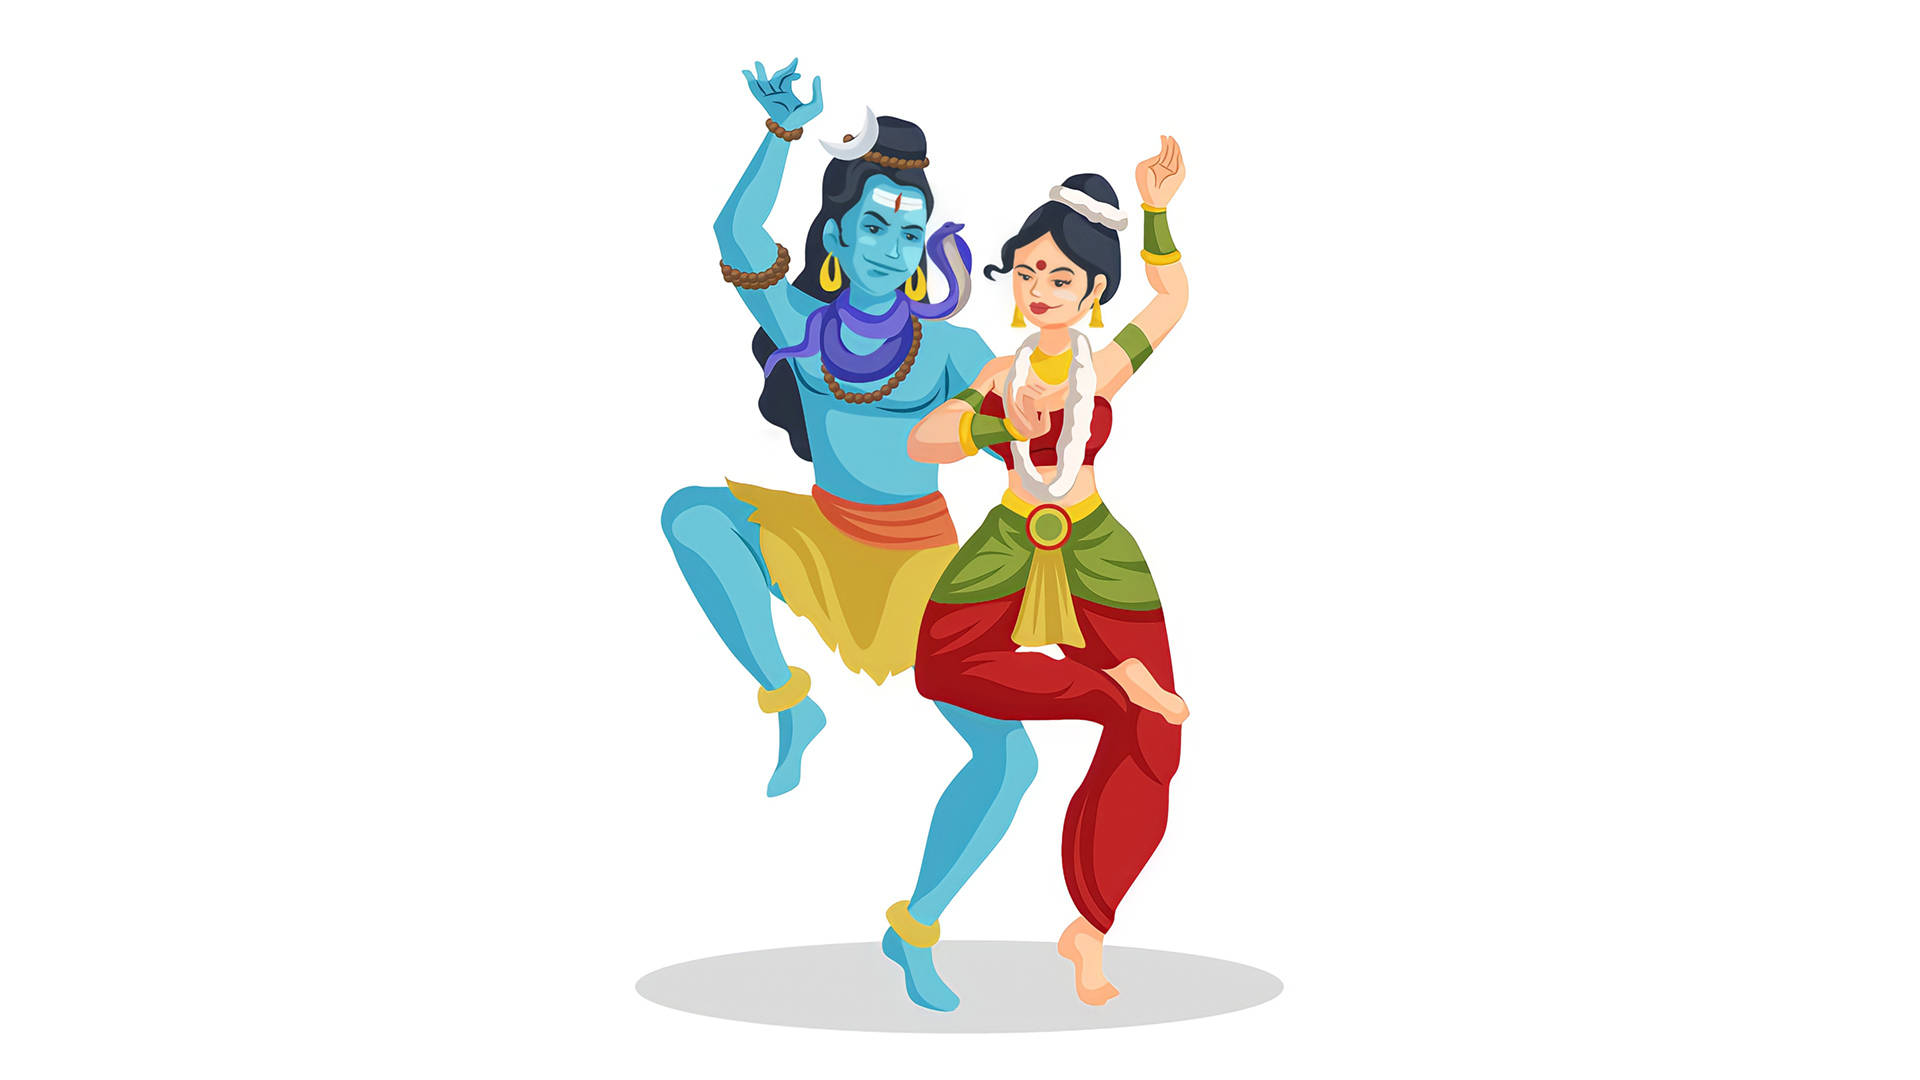 Caption: Traditional Hindu Dance Of Shiv And Parvati In Hd Background